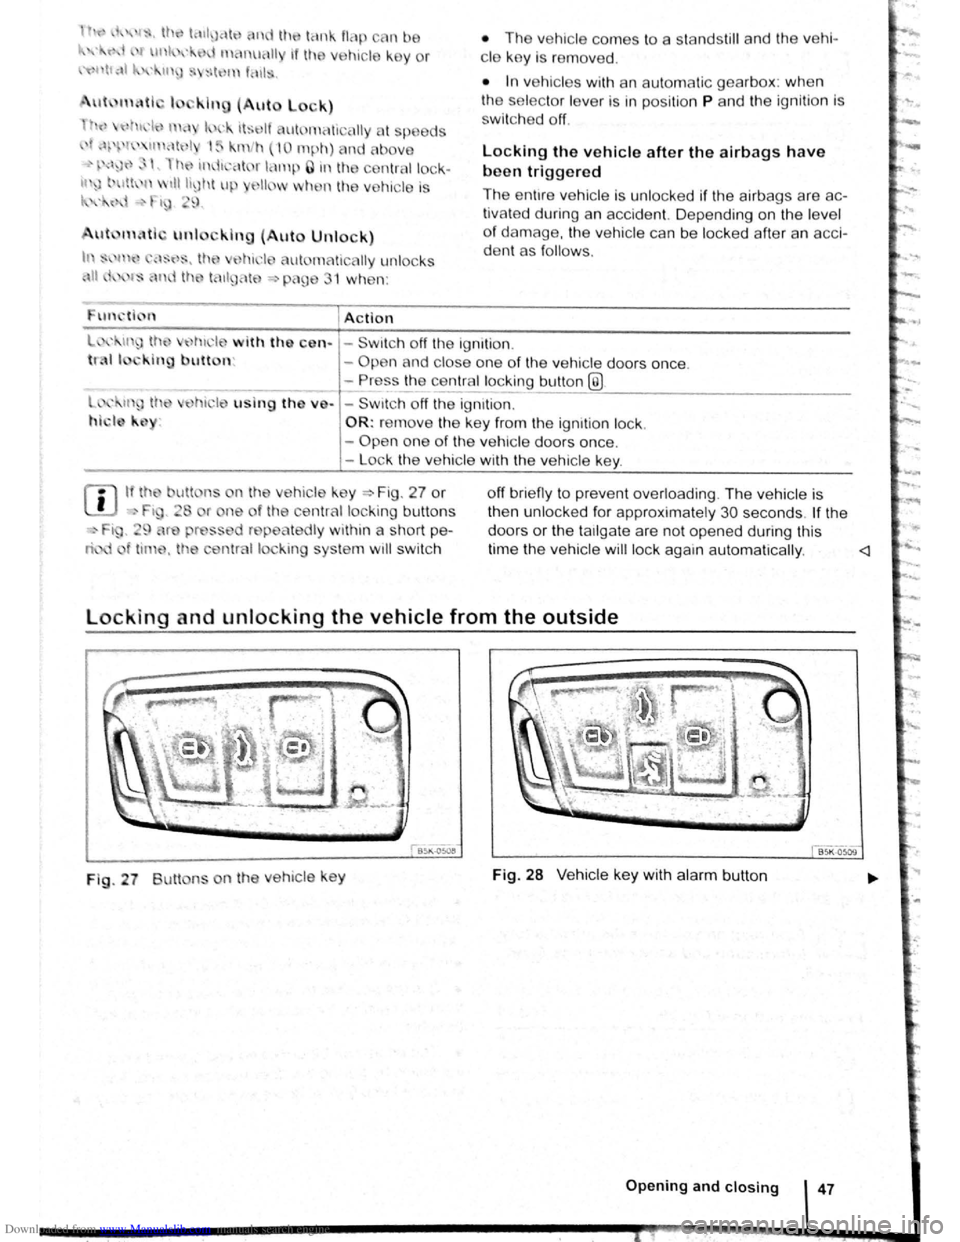 VOLKSWAGEN BEETLE 2008  Owners Manual Downloaded from www.Manualslib.com manuals search engine  h{ ,~ I,. U rl lC1tlJclt nd th tank flap cnn  be 
·  r 1 unhx I n tFinuHII if th e ve hic le k e y or 
"'~' tf,\1 1-. • "J